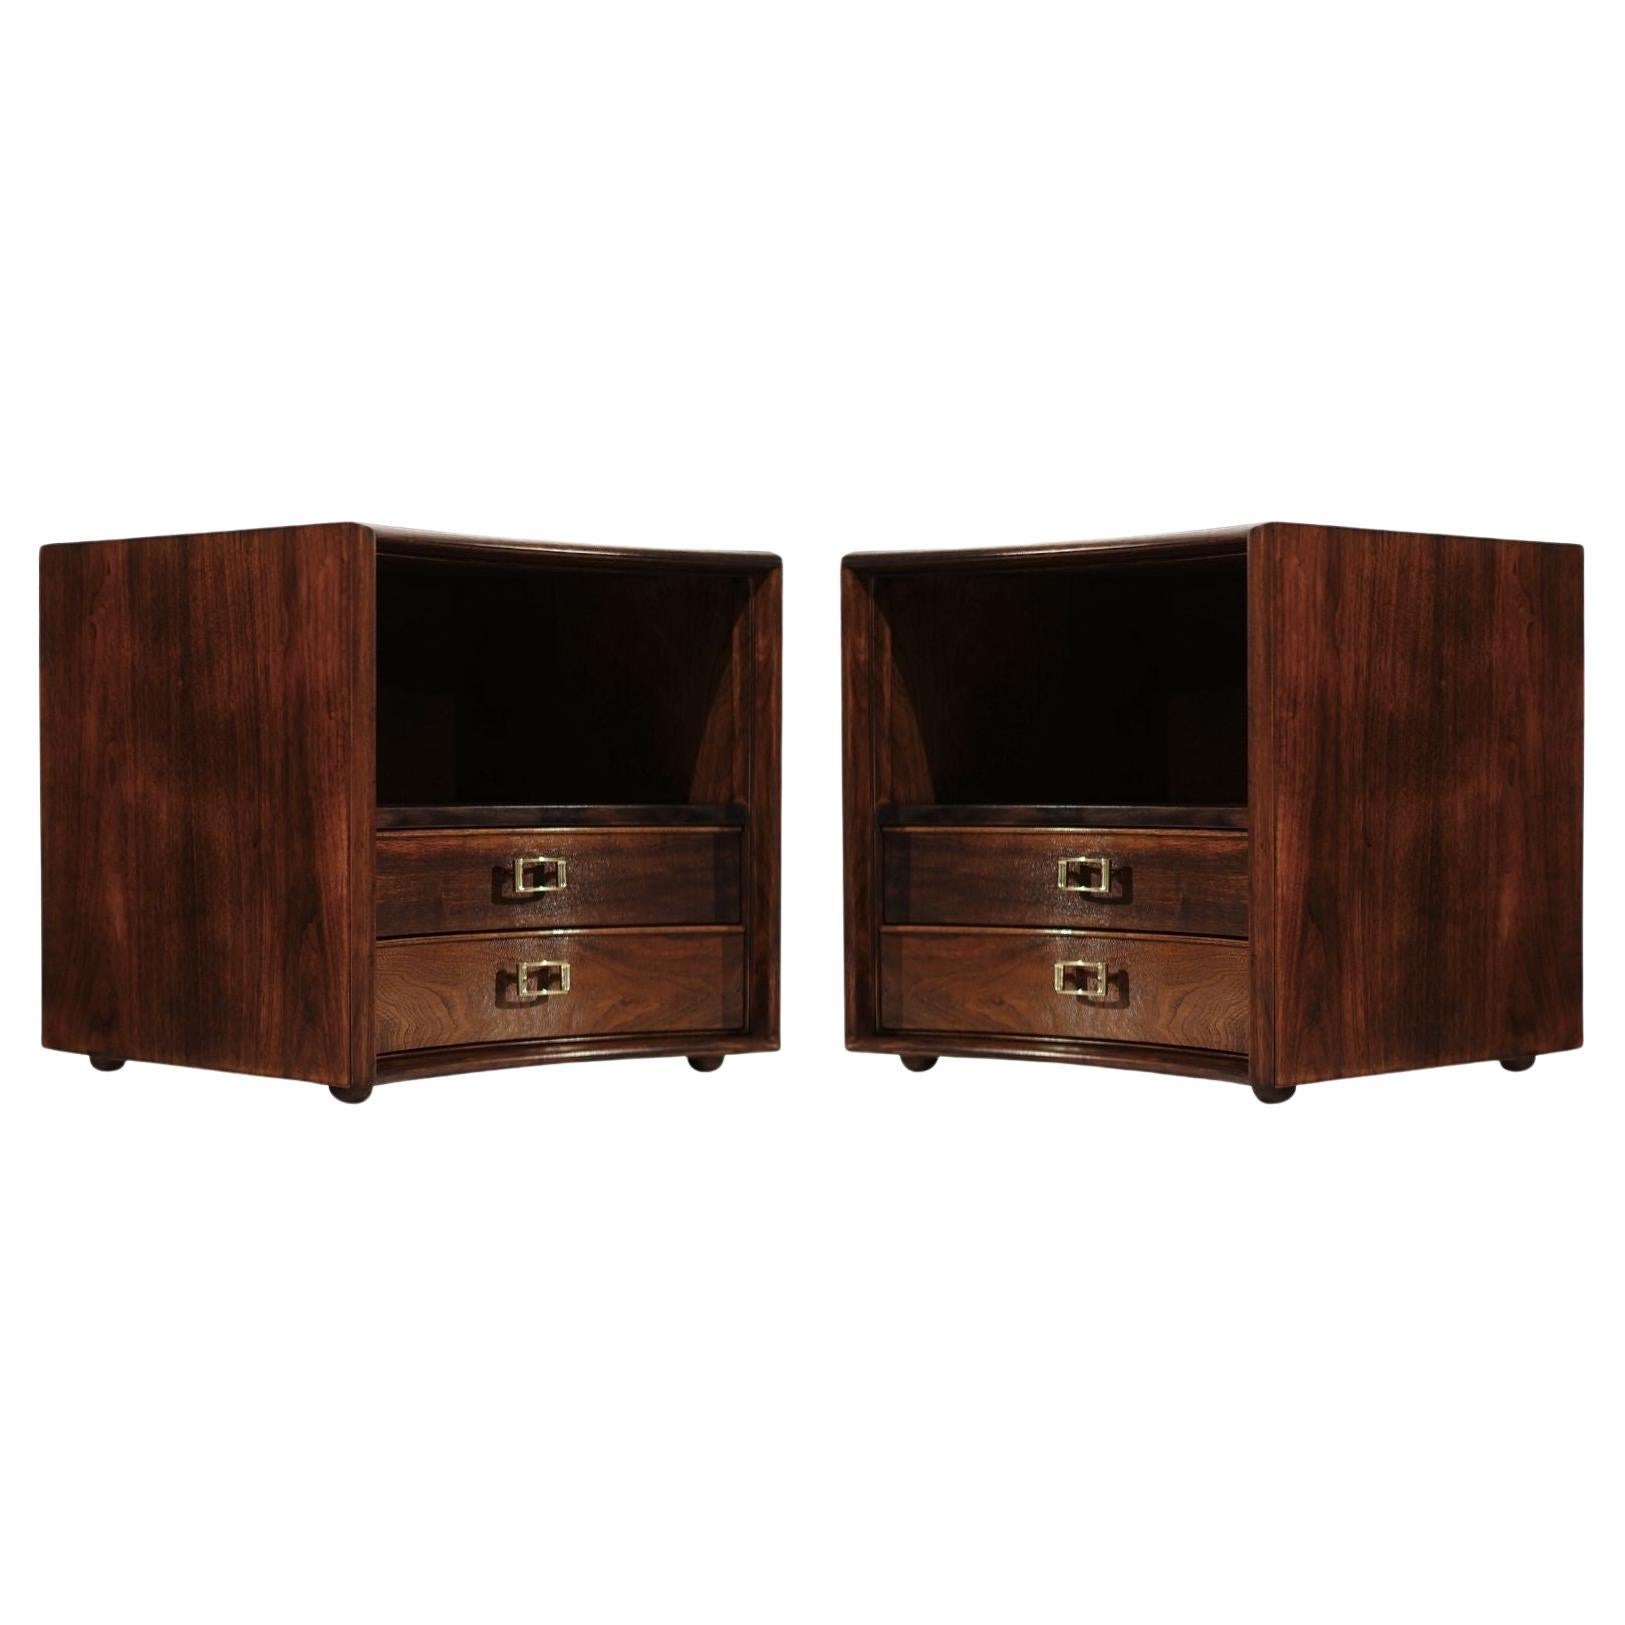 Set of Walnut Concave Bedside Tables by Paul Frankl, C. 1950s